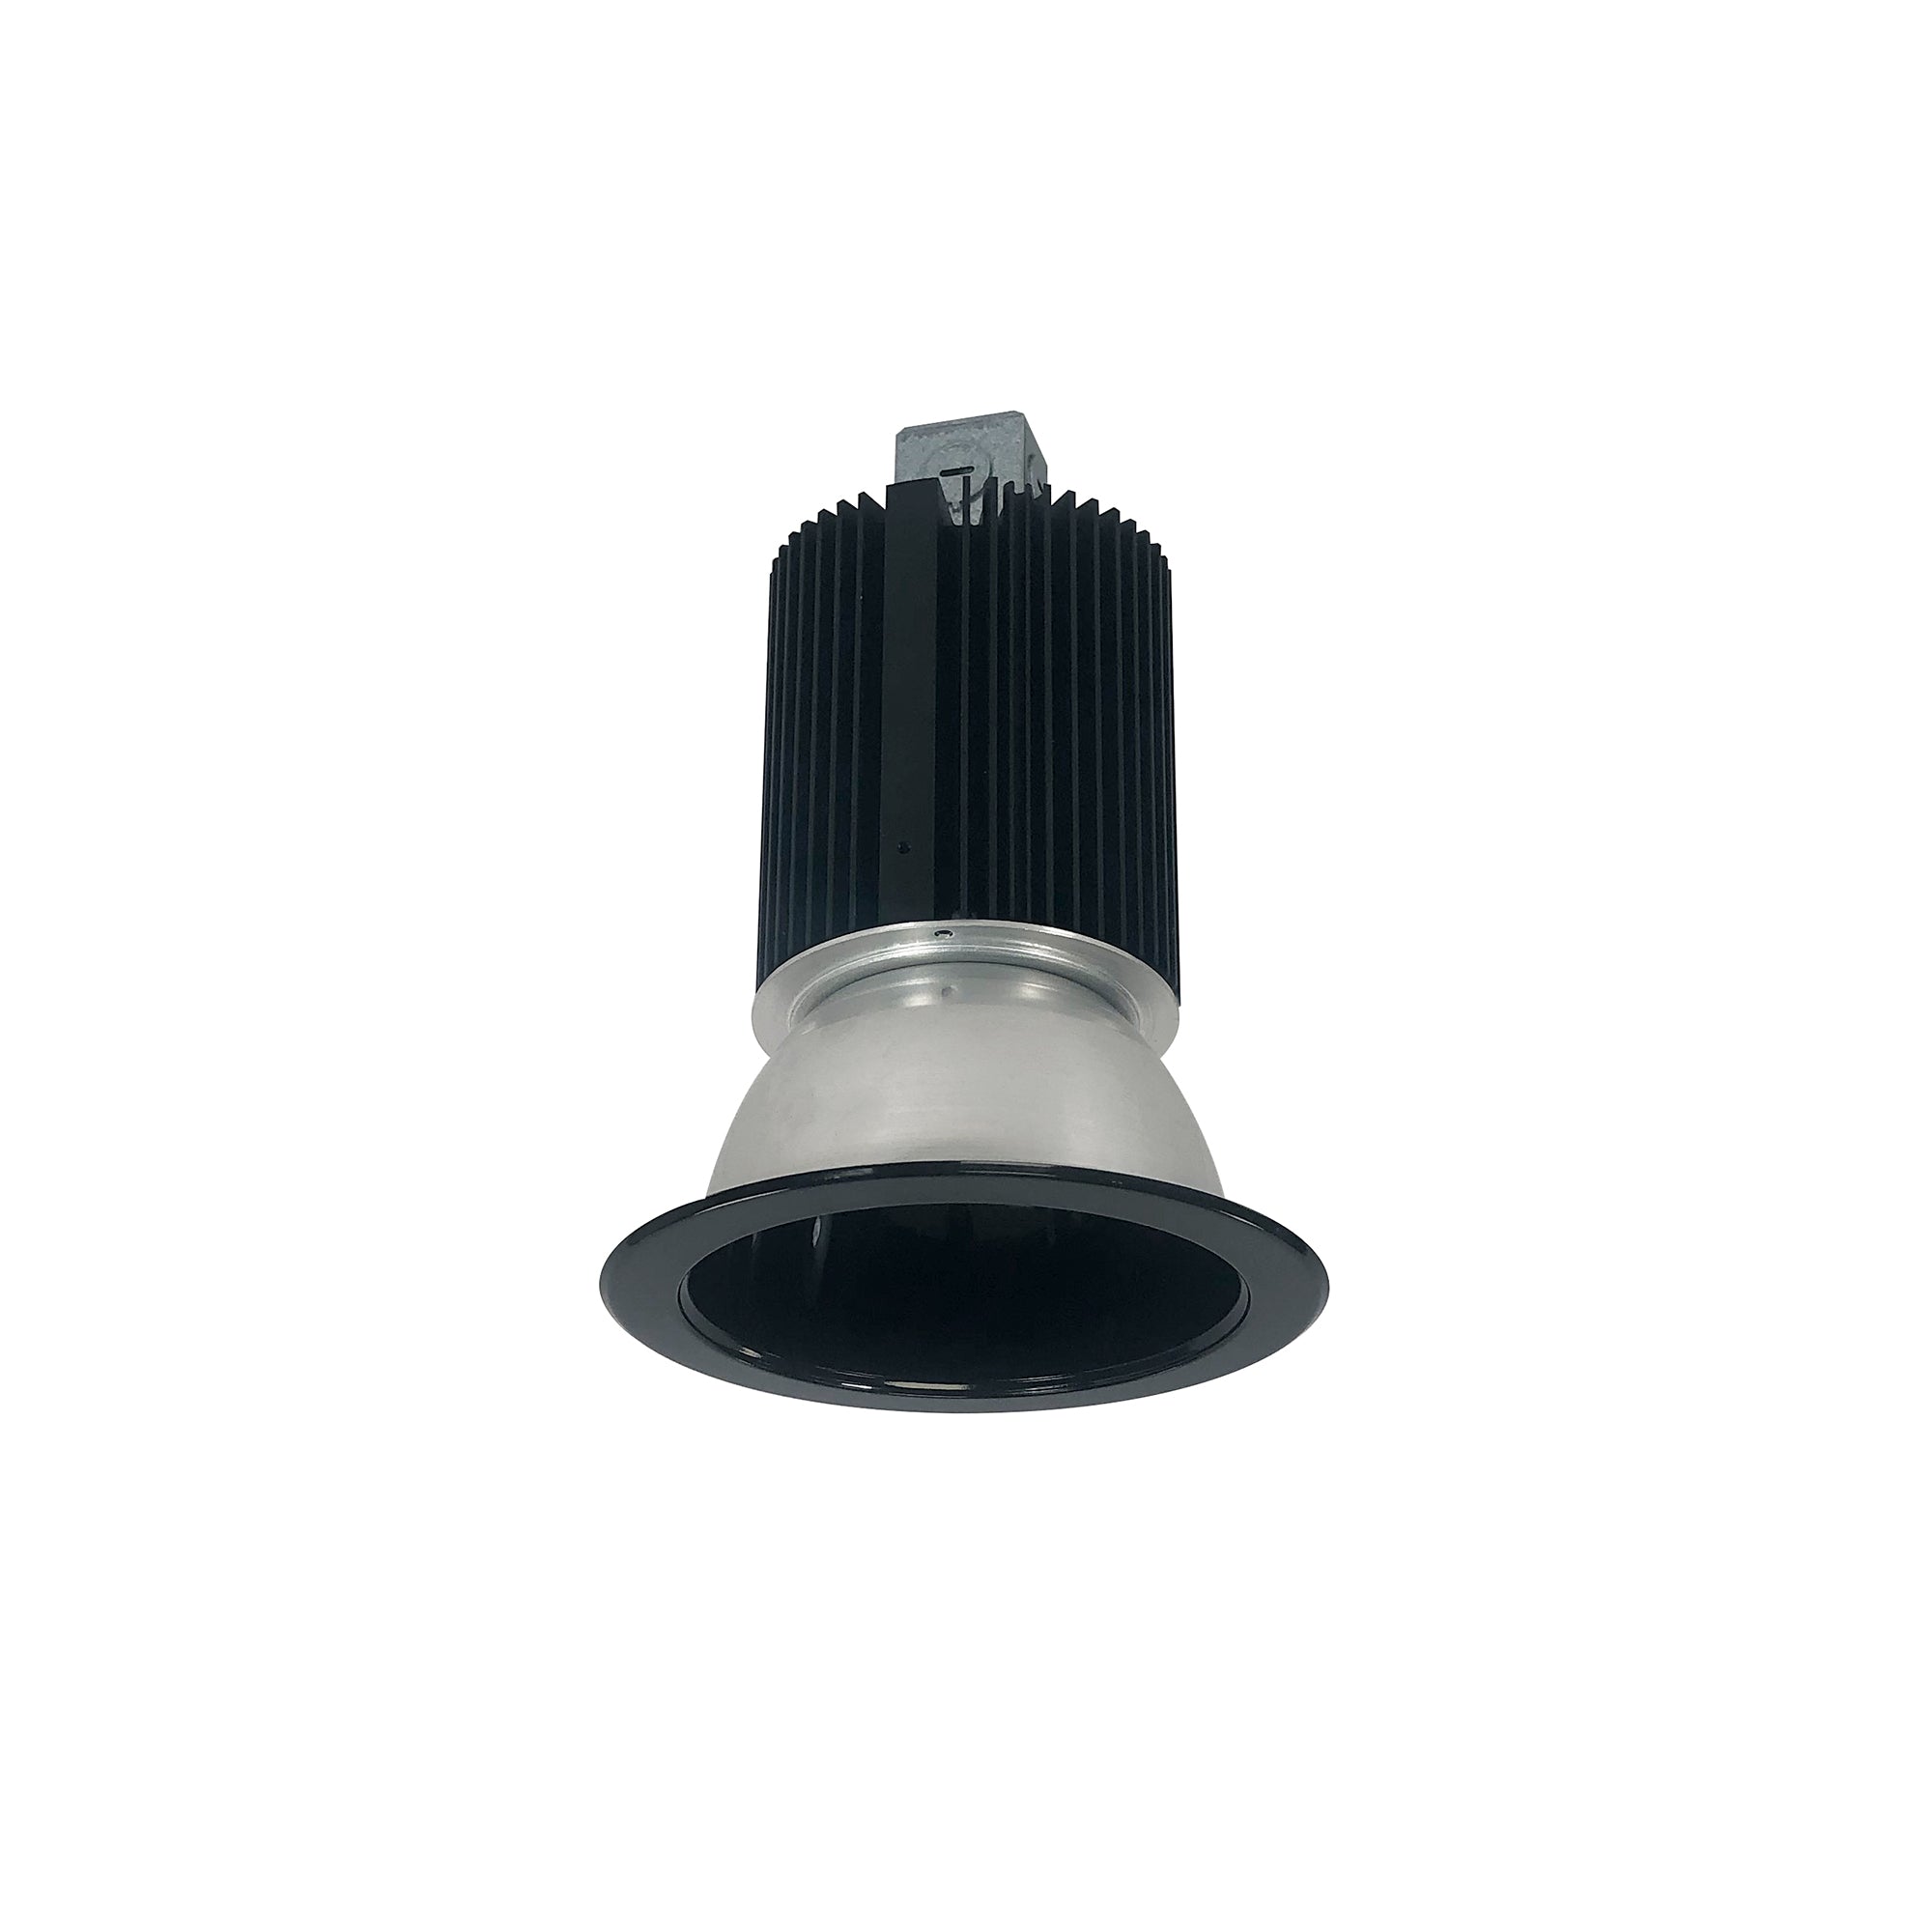 Nora Lighting NC2-431L1535MBSF - Recessed - 4 Inch Sapphire II Open Reflector, 1500lm, 3500K, 40-Degrees Narrow Flood, Black Self Flanged